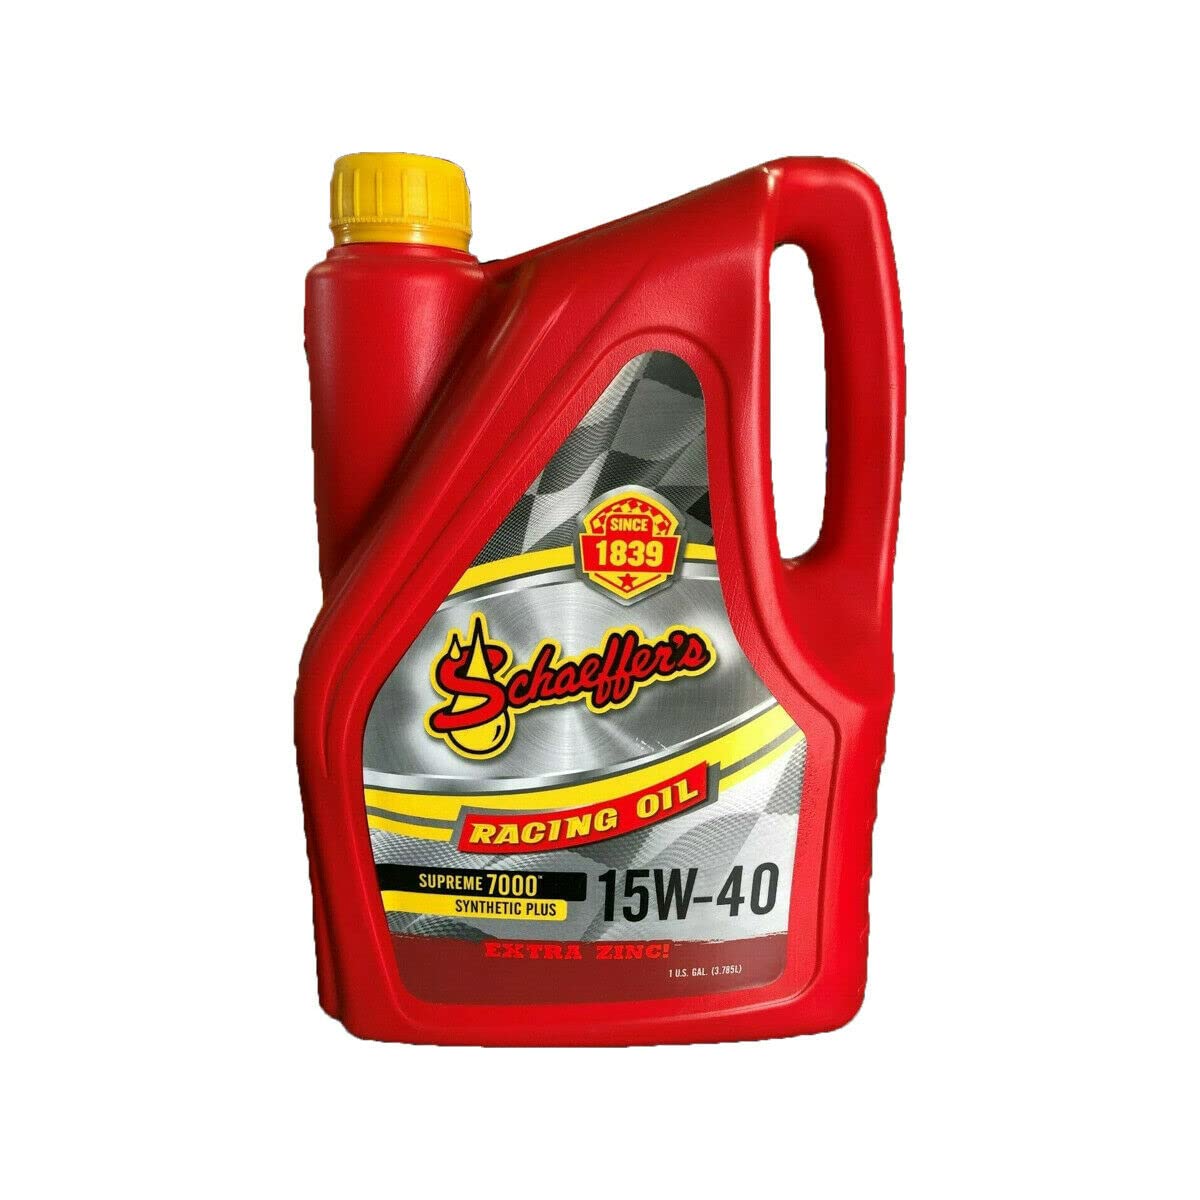 Supreme 7000 Synthetic Plus SAE 15W-40 Racing Oil